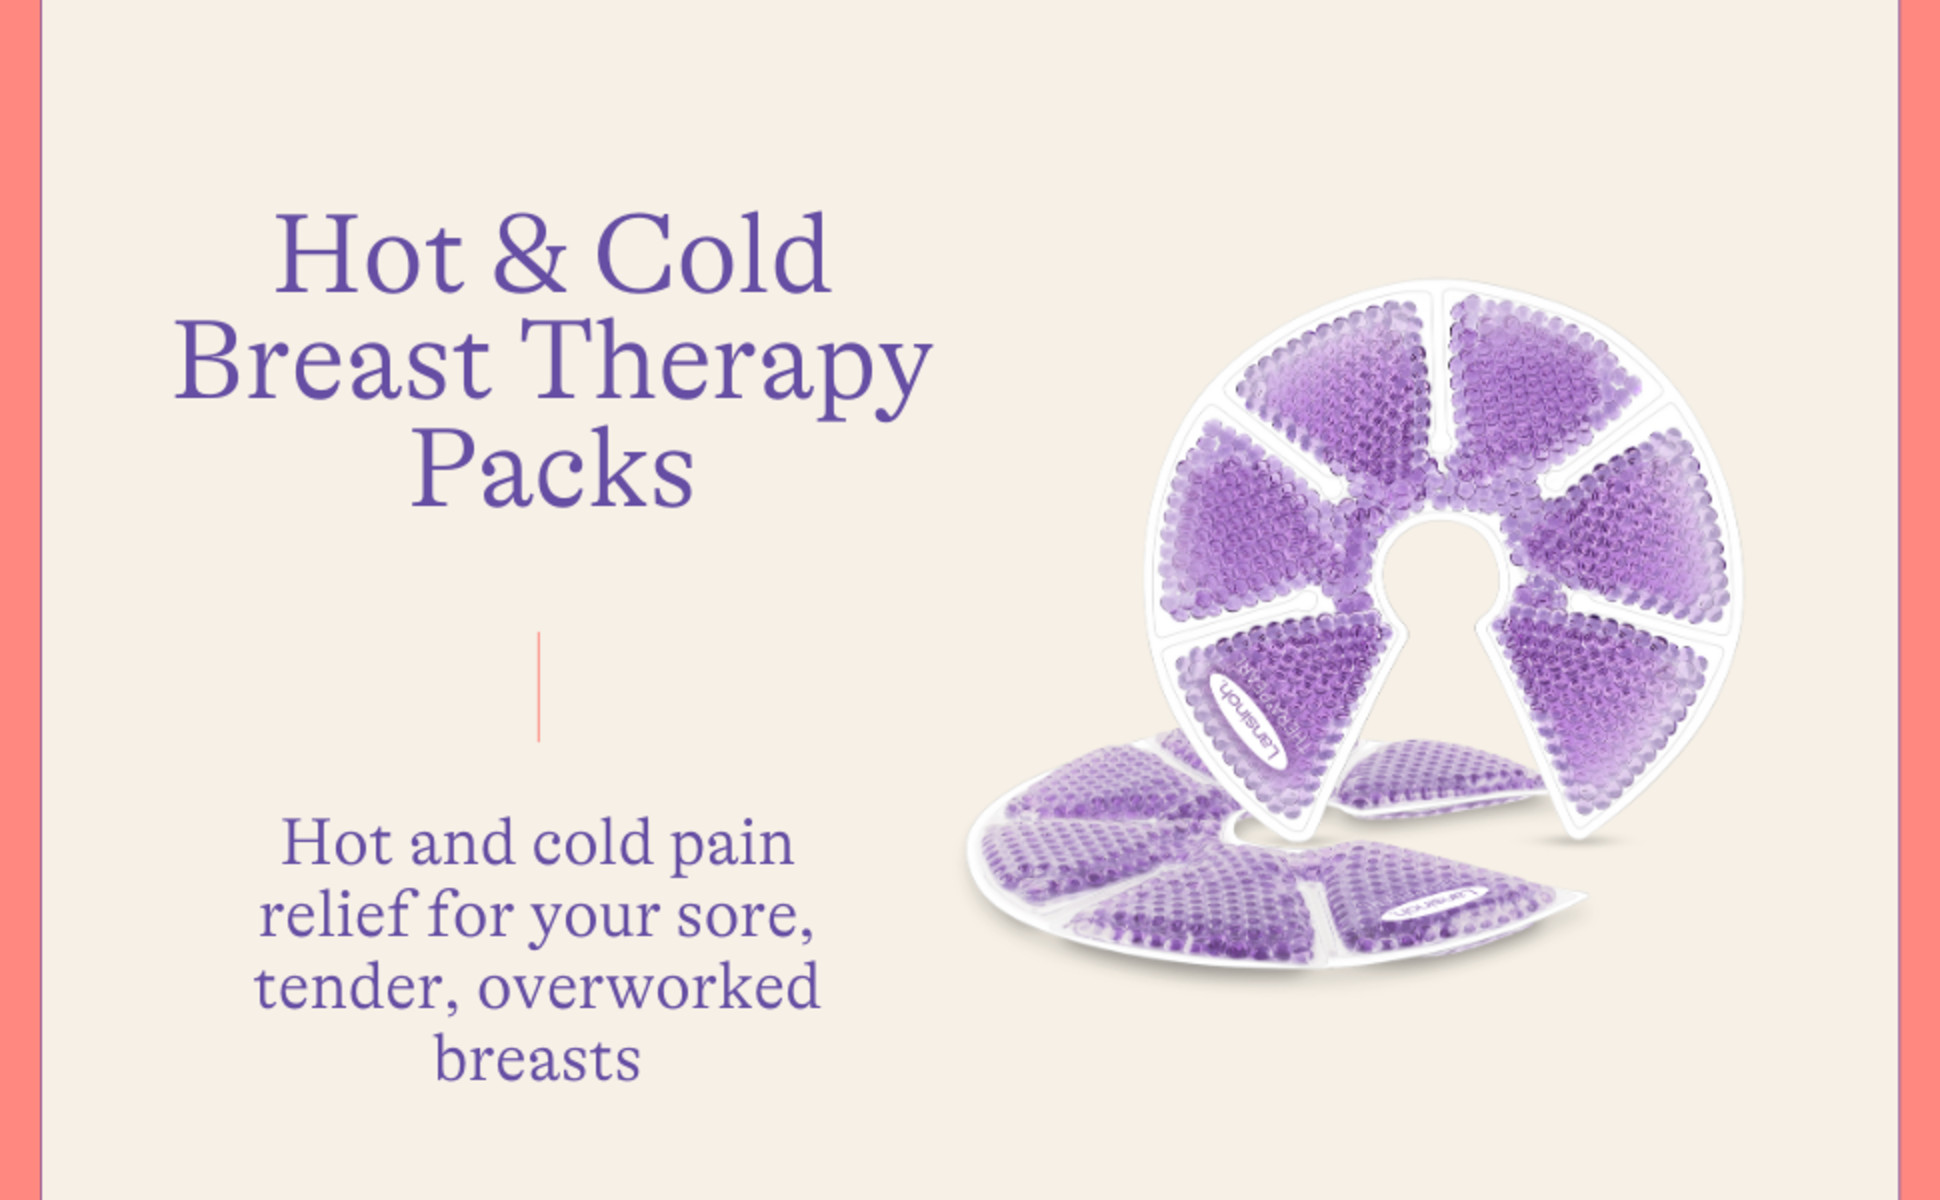 Lansinoh Hot & Cold Breast Therapy Packs with Covers, 2 Pack